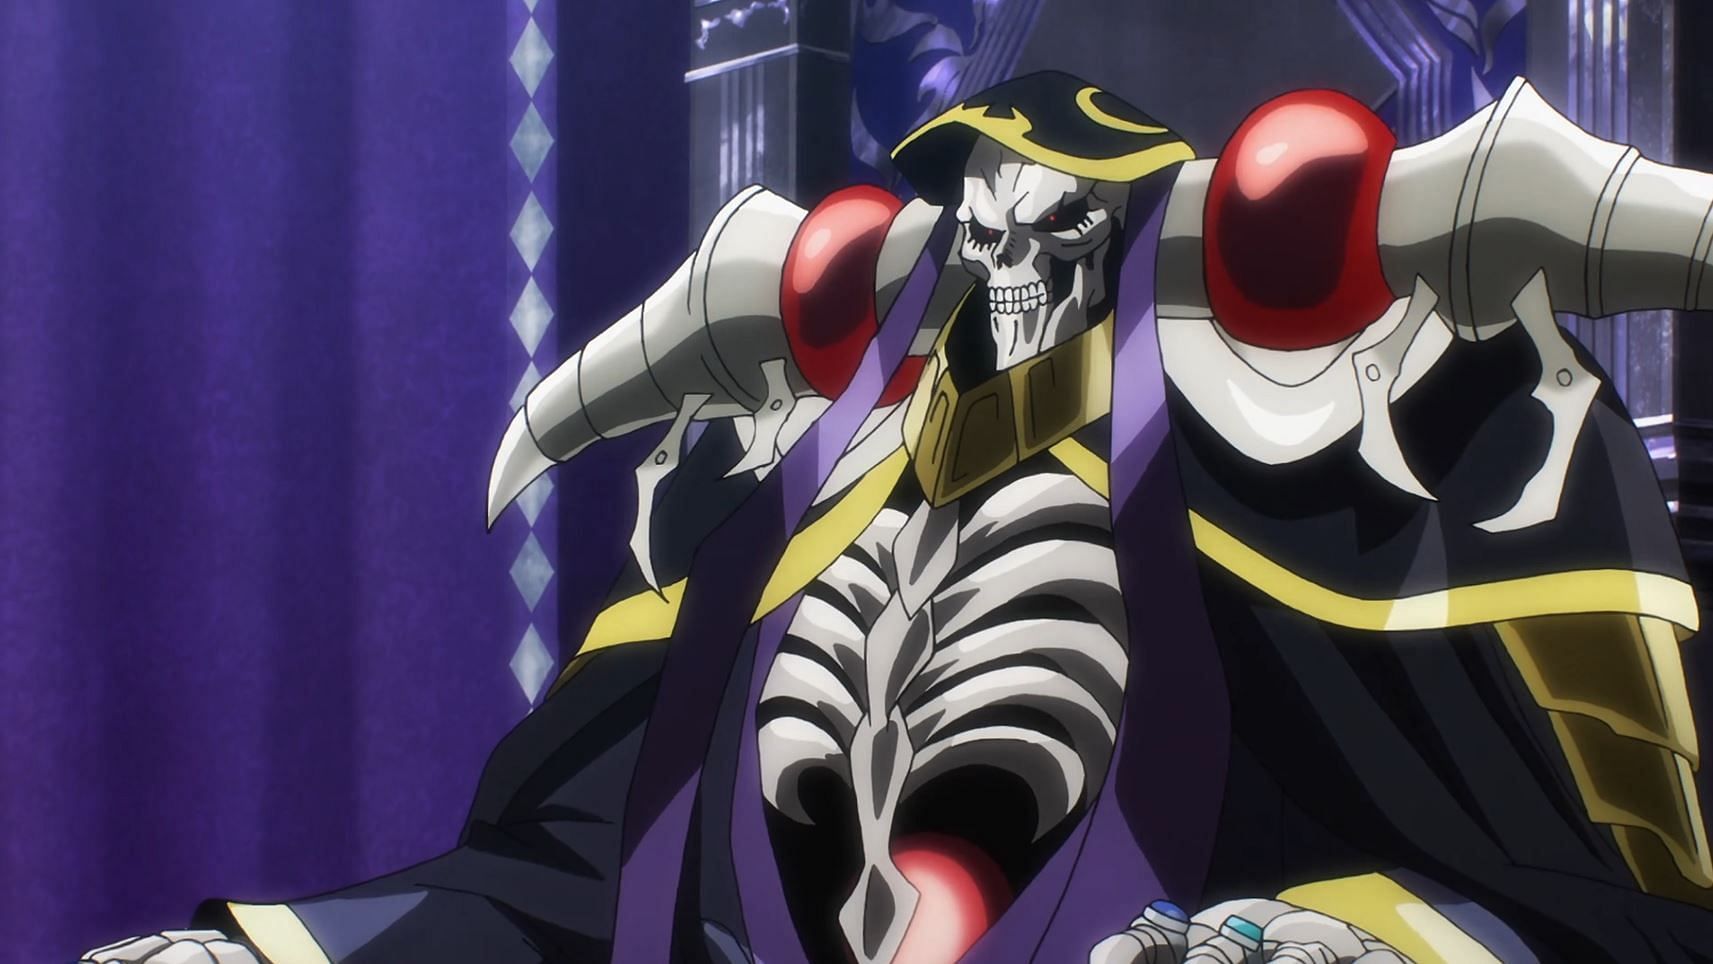 Overlord IV Episode 10, Overlord Wiki